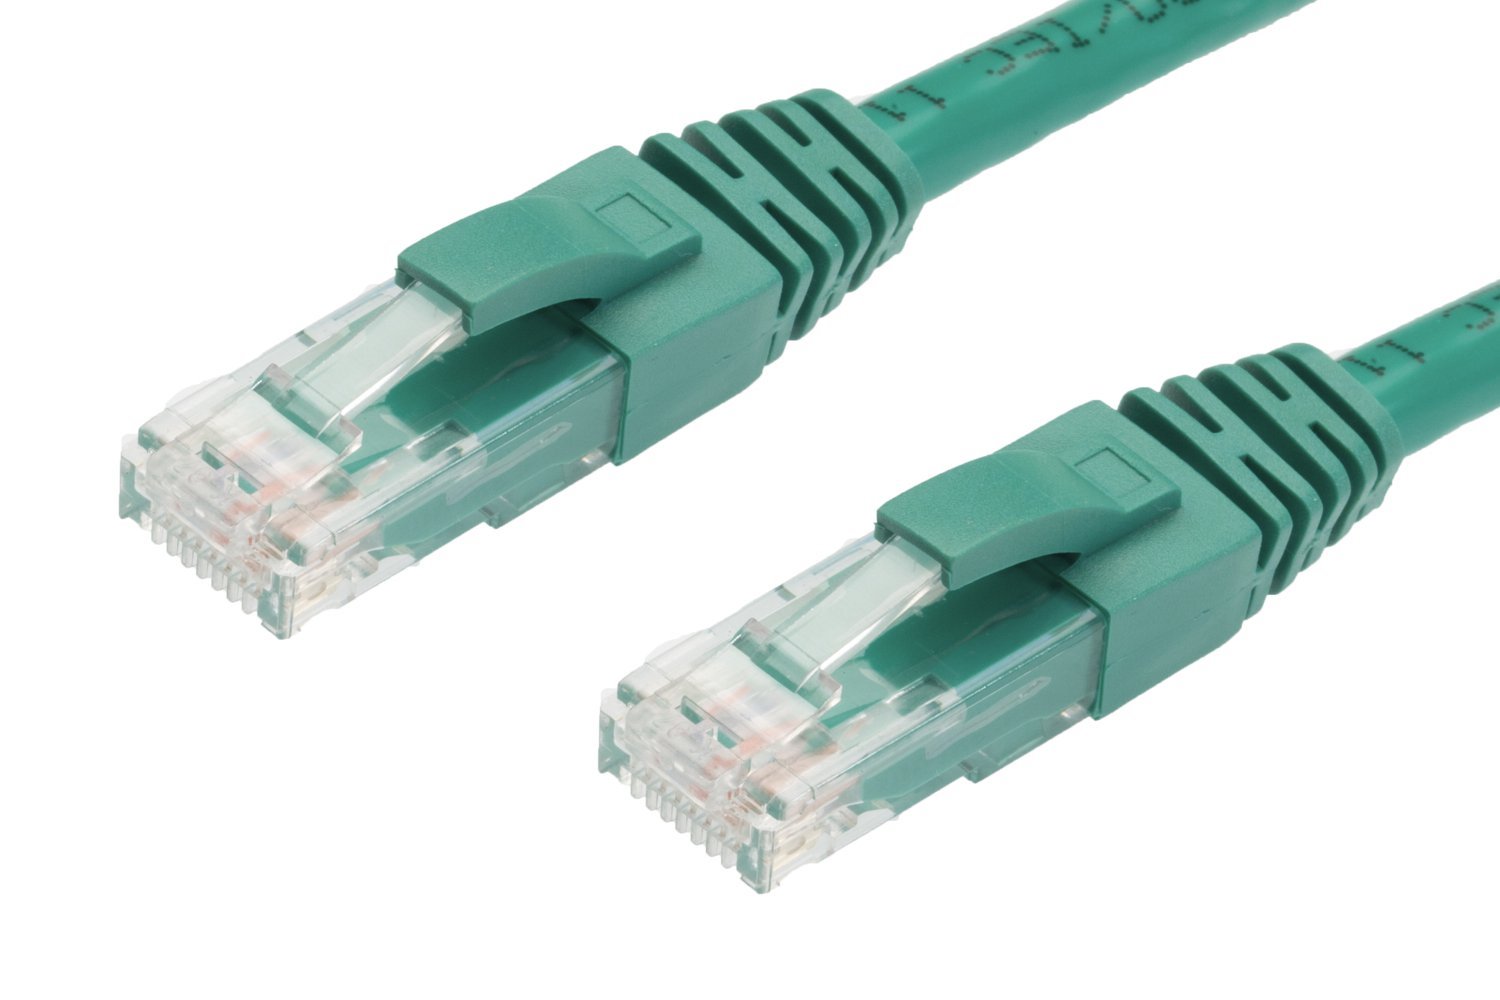 4Cabling 0.5M Cat 6 Ethernet Network Cable: Green